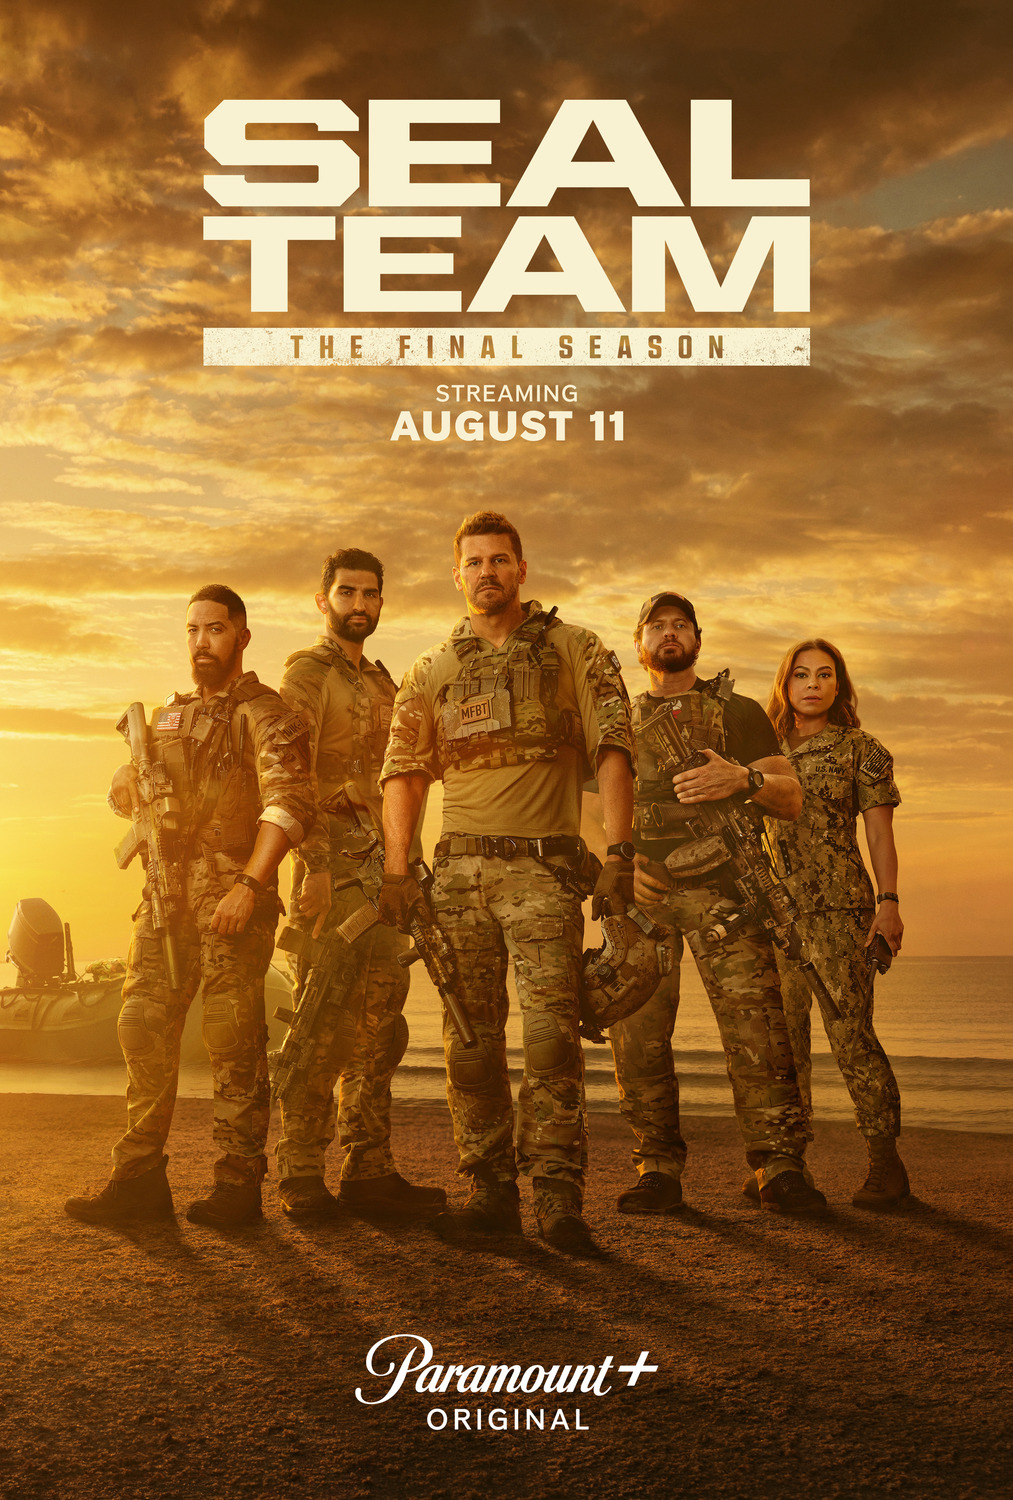 Extra Large TV Poster Image for SEAL Team (#7 of 7)